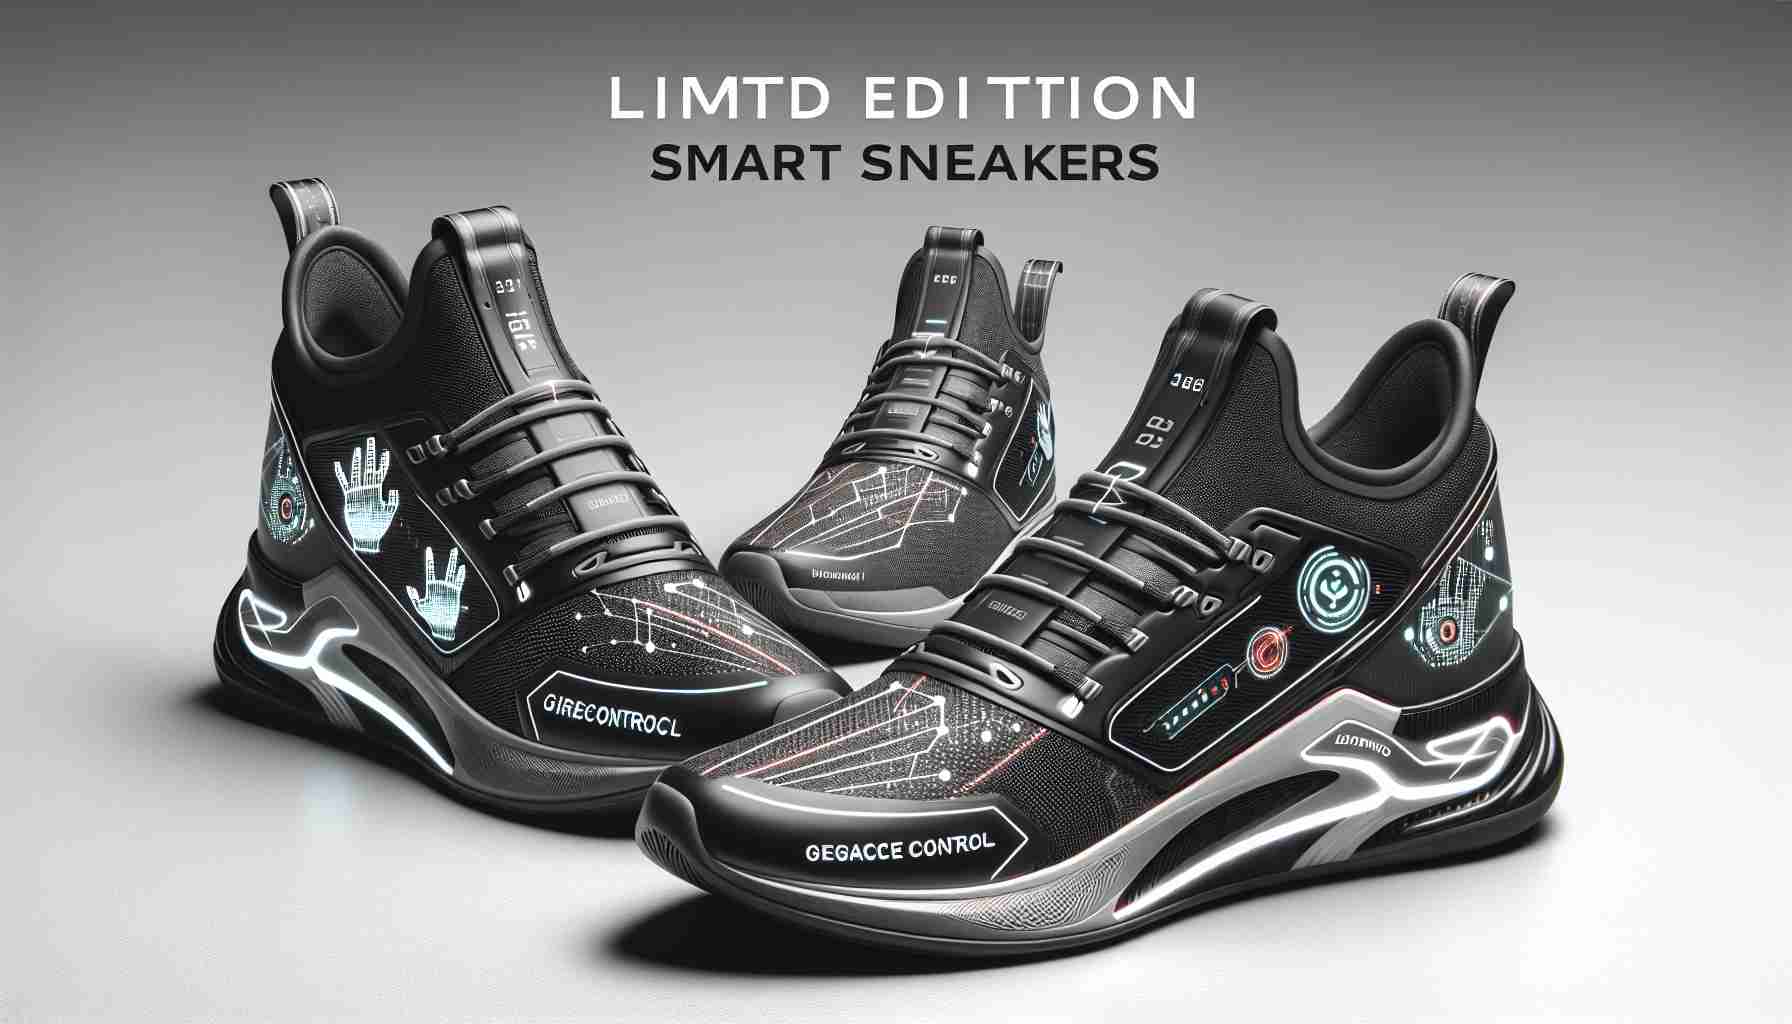 Samsung Unveils Limited Edition Smart Sneakers with Gesture Control